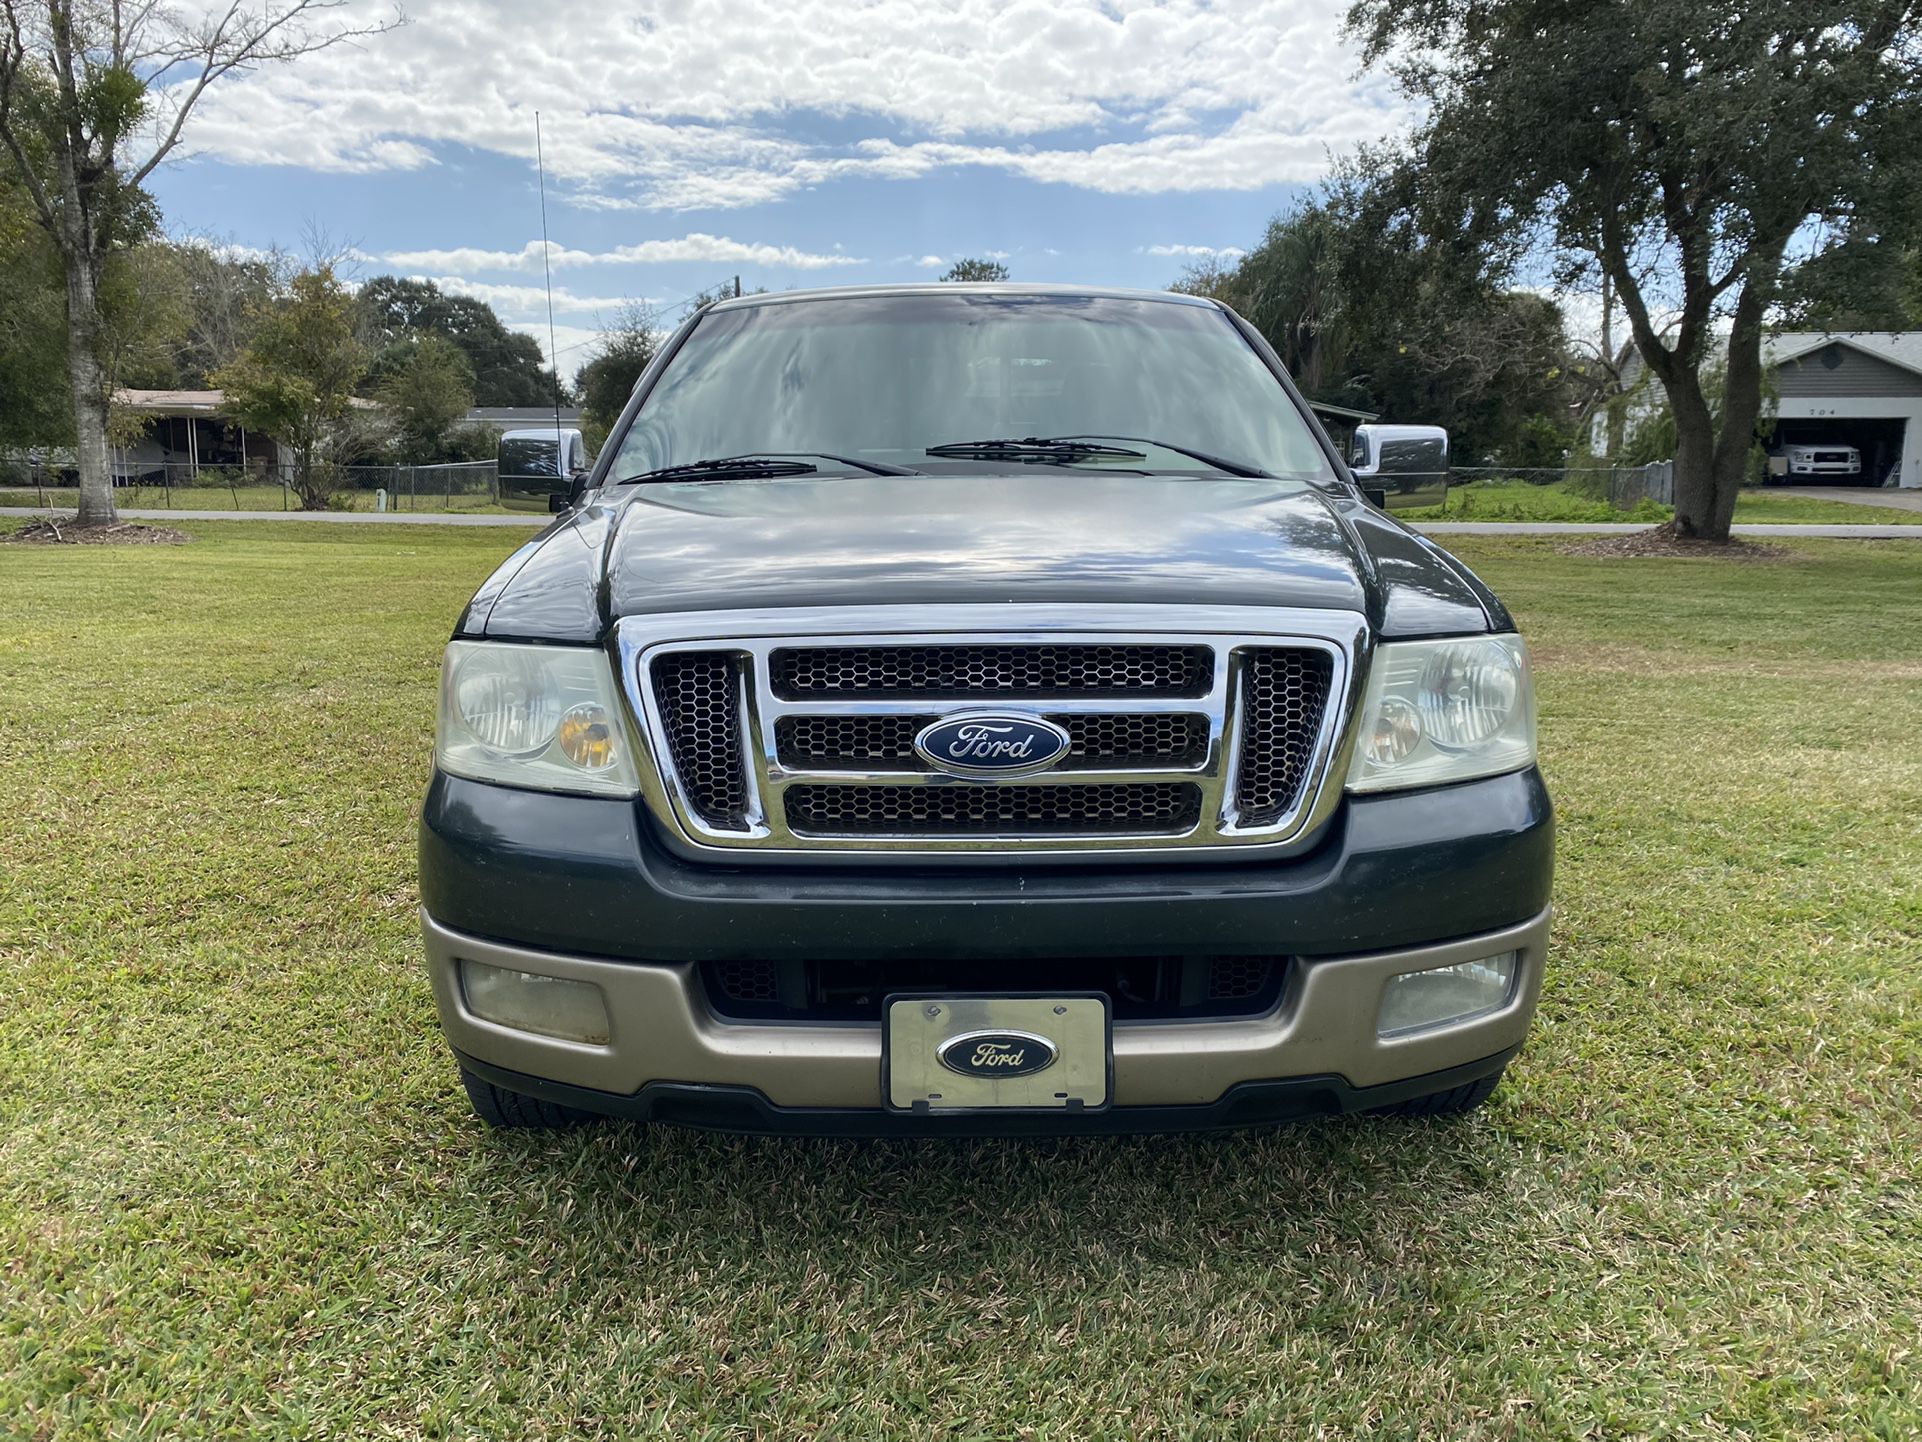 2004 Ford F-150 for Sale in Kissimmee, FL - OfferUp